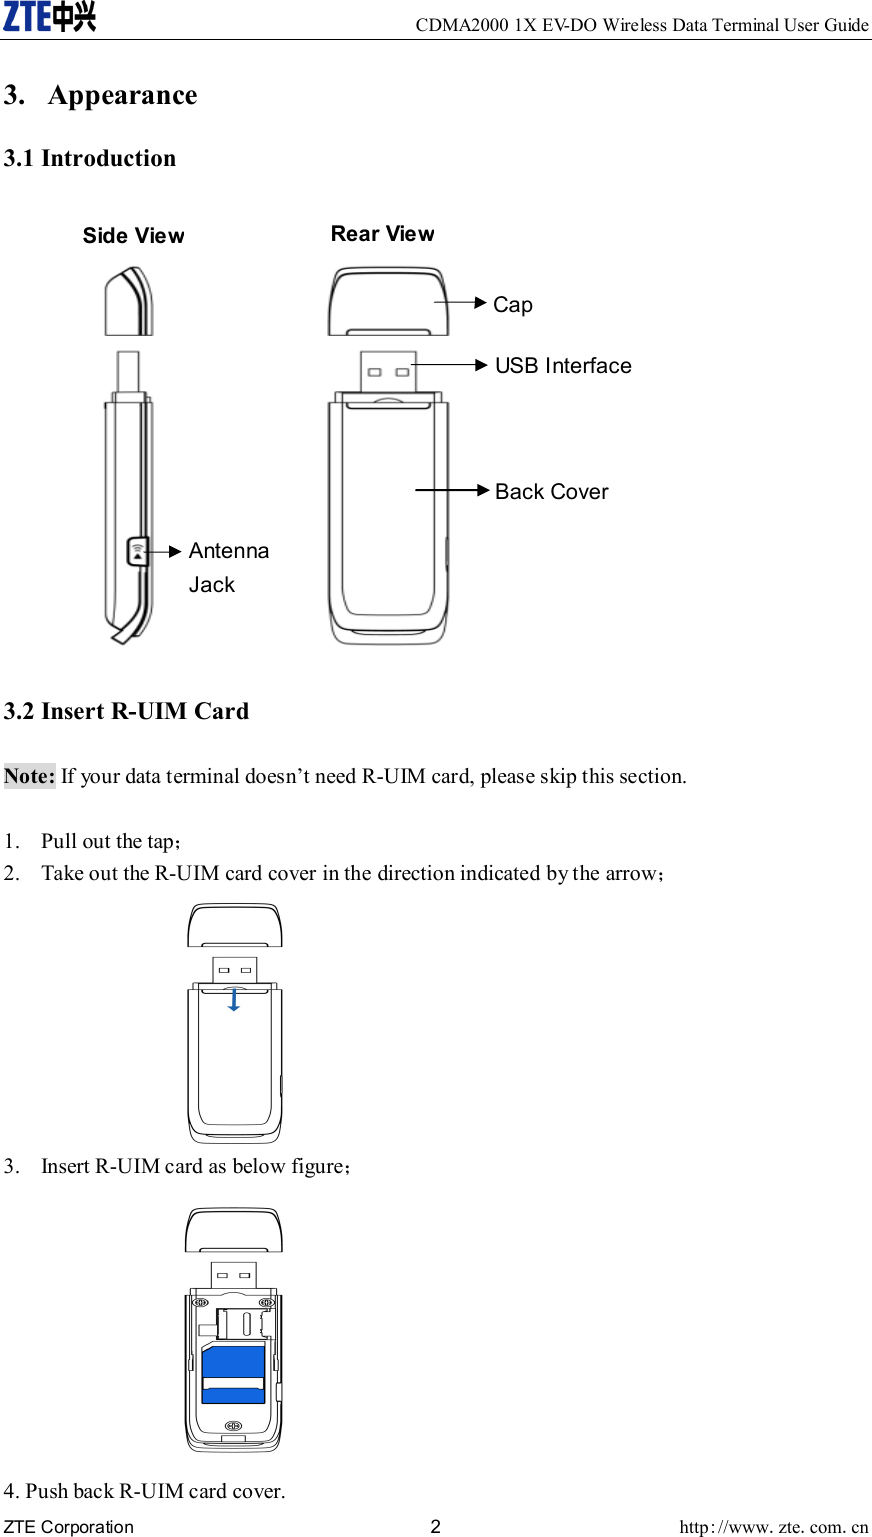     CDMA2000 1X EV-DO Wireless Data Terminal User Guide ZTE Corporation 2 http://www.zte.com.cn  3. Appearance 3.1 Introduction  3.2 Insert R-UIM Card  Note: If your data terminal doesn’t need R-UIM card, please skip this section.  1. Pull out the tap； 2. Take out the R-UIM card cover in the direction indicated by the arrow；  3. Insert R-UIM card as below figure；  4. Push back R-UIM card cover. Antenna Jack Cap Back Cover USB Interface Side View Rear View 